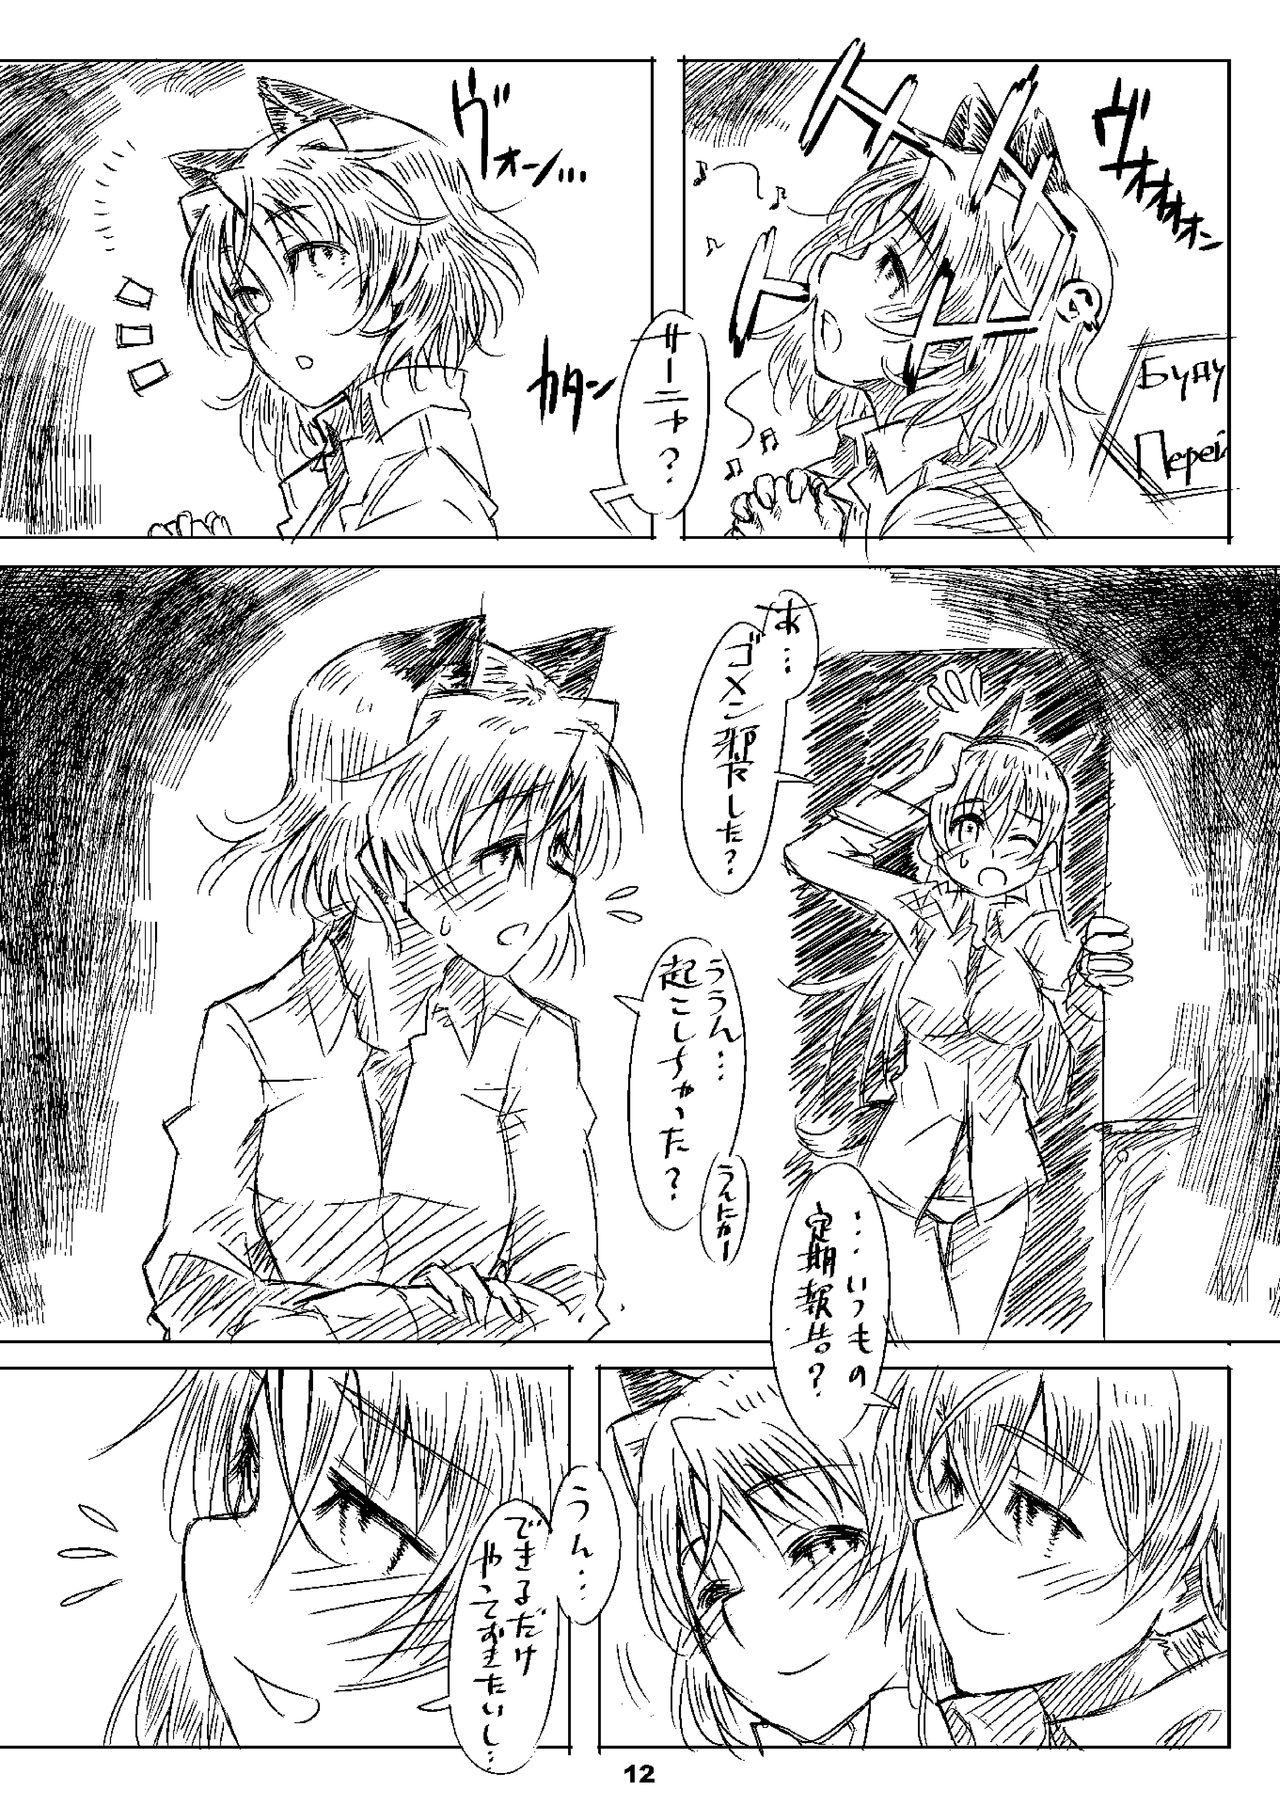 Amateur Teen Starlight Milky Way 4 - Strike witches Spoon - Page 11